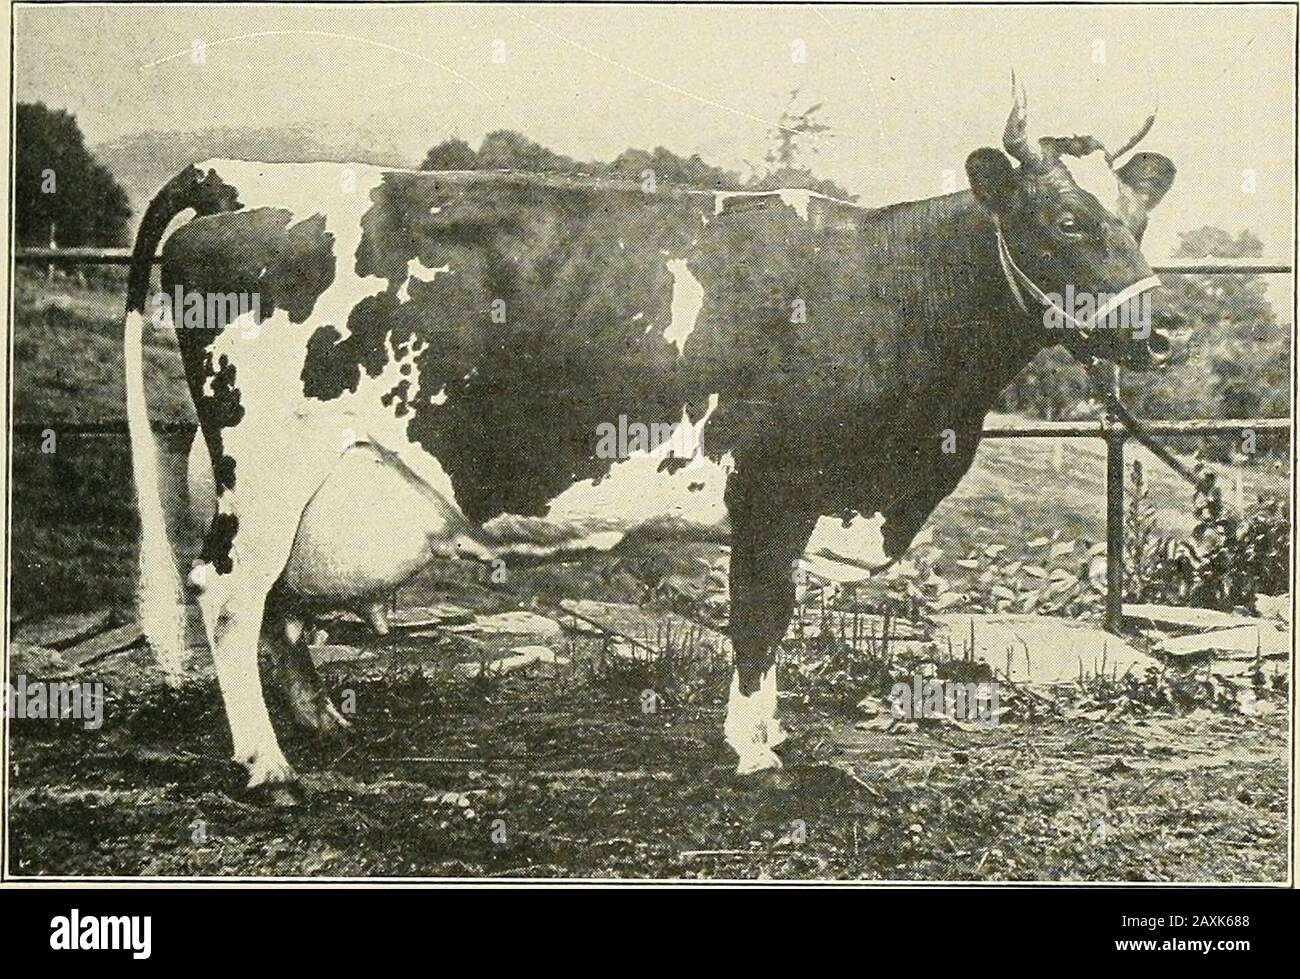 Ayrshire year book . Sunnyside Nellie, 782 7,472 305.88 360 4.11 Owned by Branford Farms, Gro-ton. Conn. 27342 Imp. Straith Lady Laurie, 553 7,454 296.55 349 3.98 Owned by Cornell University, Ith-aca, N. Y. 24581 Crimson Miss, 285 7,440 313.60 369 4.21 Owned by Geo. F. Stone, Littleton,Mass. 27338 Imp. Foulton Primrose, 554 7,439 315.42 371 4.24 Owned by H. W. Pardey, Segre-ganset, Mass. 26941 Soon, 429 7,434 303.80 357 4.09 Owned by W. V. Probasco, CreamEidge, N. J. 24178 Eva of Spring Hill 2d, 304 7,415 328.49 386 4.43 Owned by C. A. Griscom, Haver-ford, Pa. 13688 Eose Dolman, 21 7,409 270.6 Stock Photo